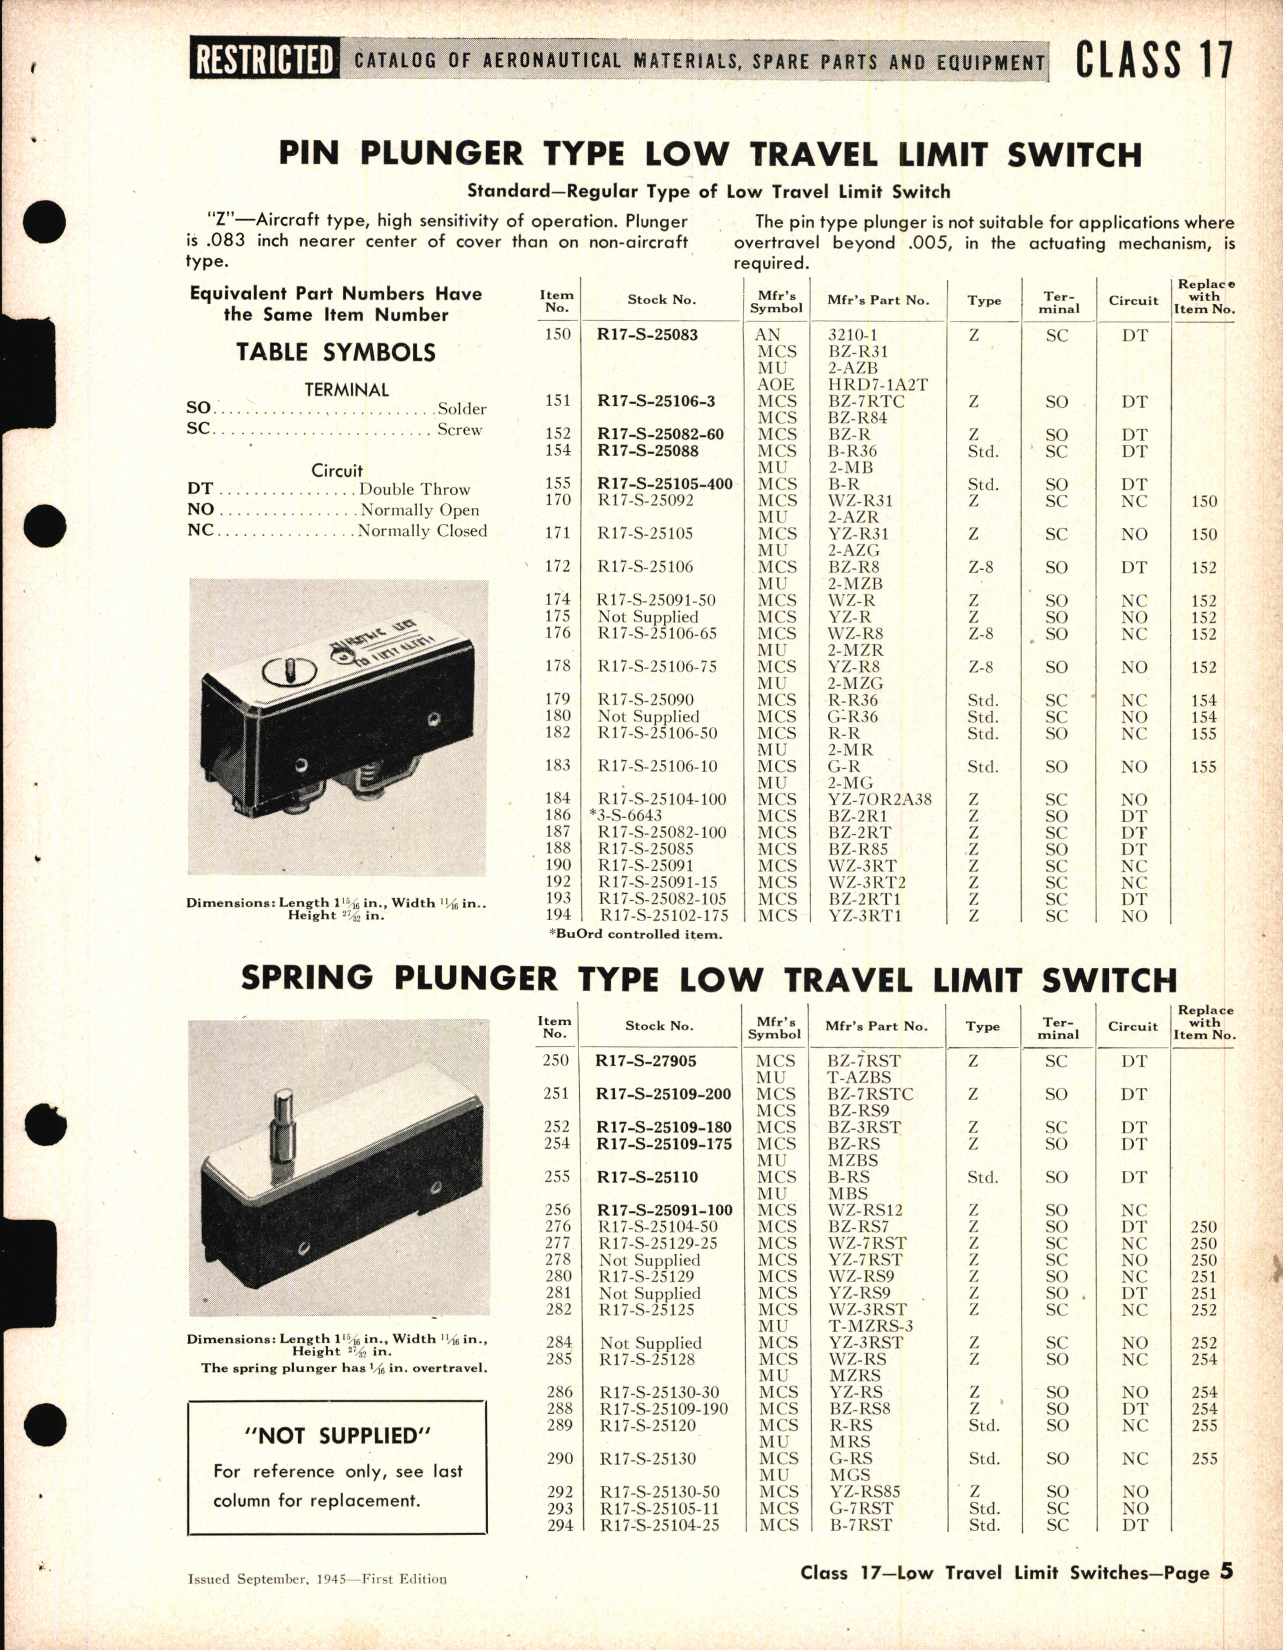 Sample page 5 from AirCorps Library document: Low Travel Limit Switches